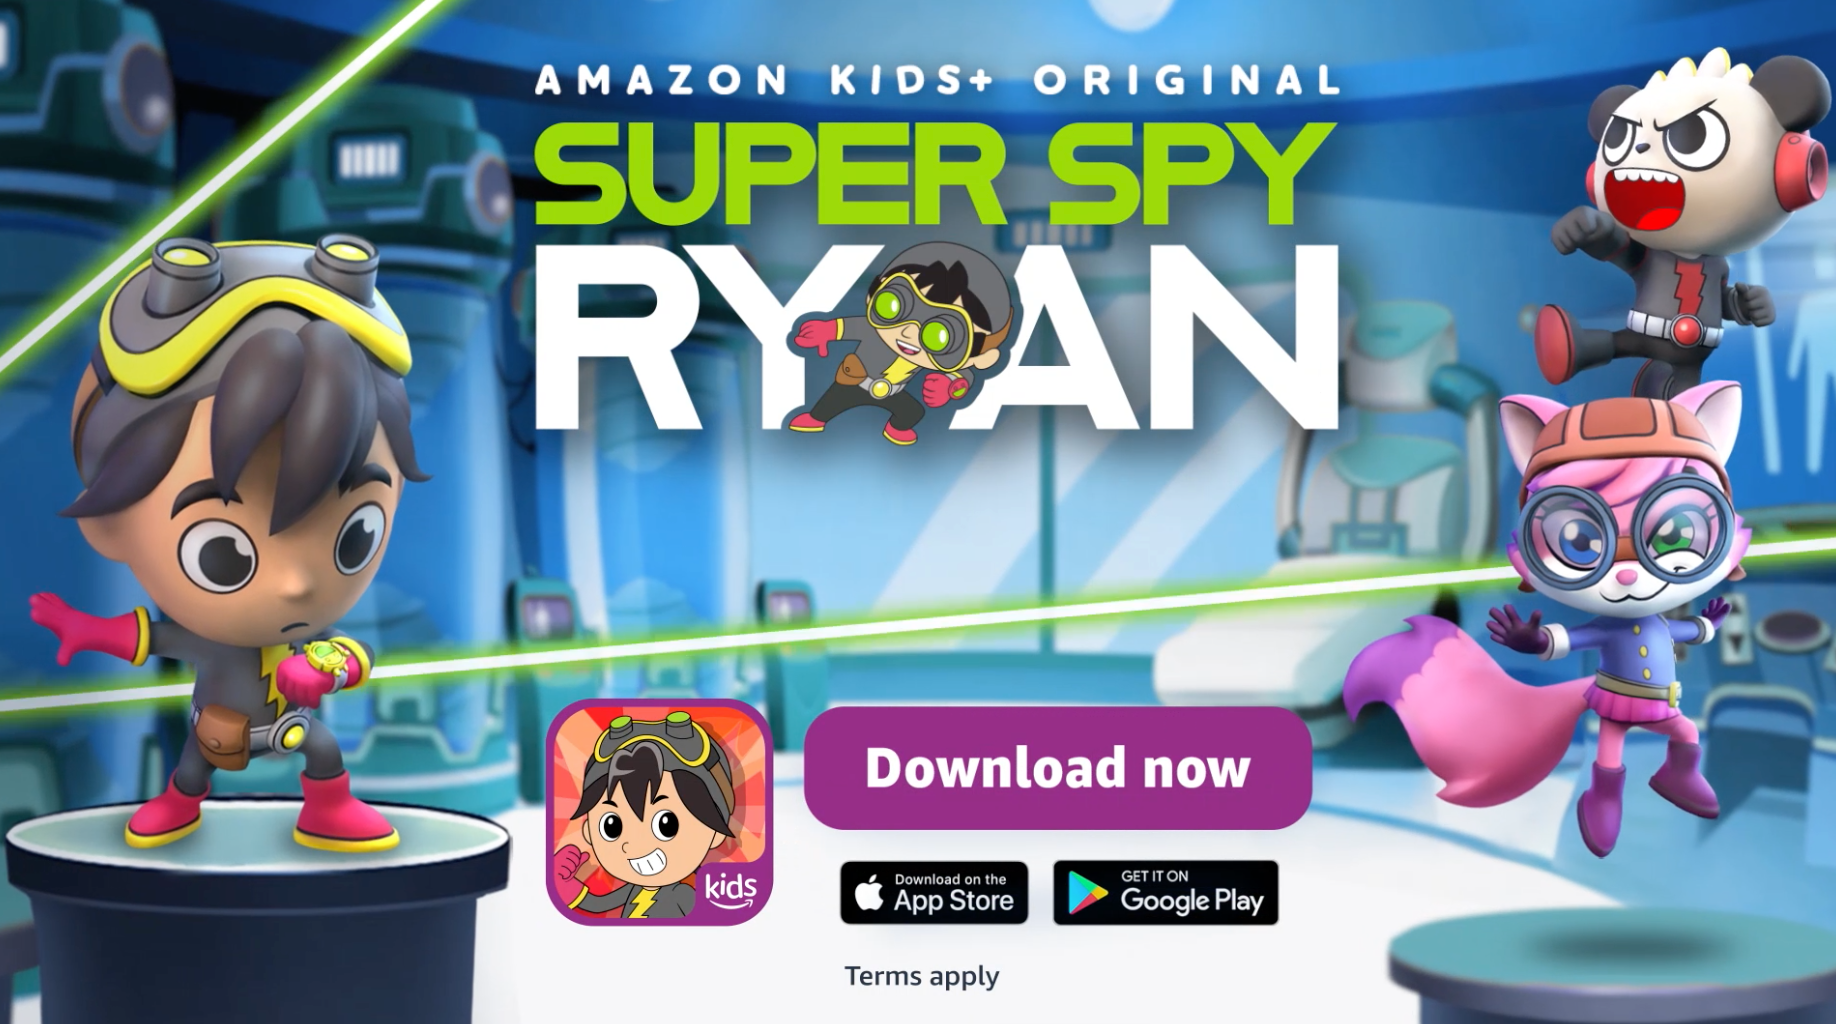 Tag with Ryan - Apps on Google Play